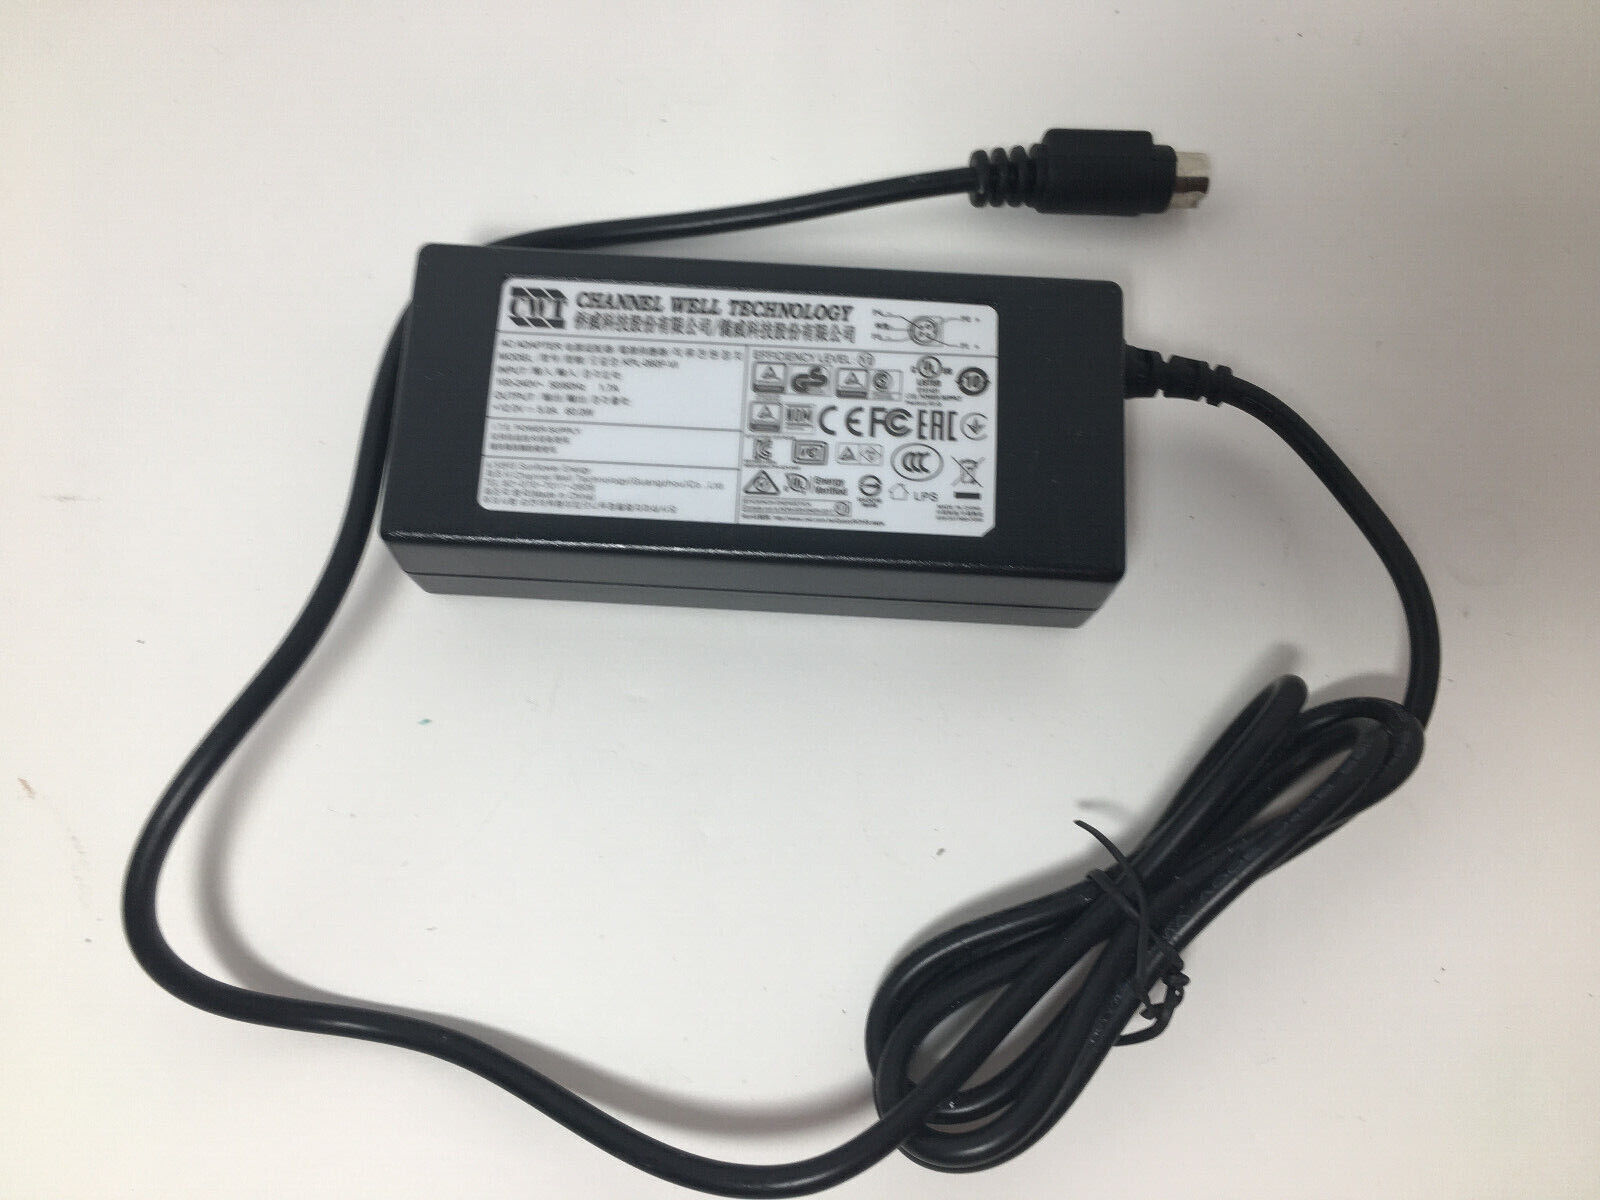 Genuine CWT Channel Well Technology AC Adapter KPL-060F-VI 12V 5A 60W 4-Pin NEW Compatible Brand Universal Type Power A